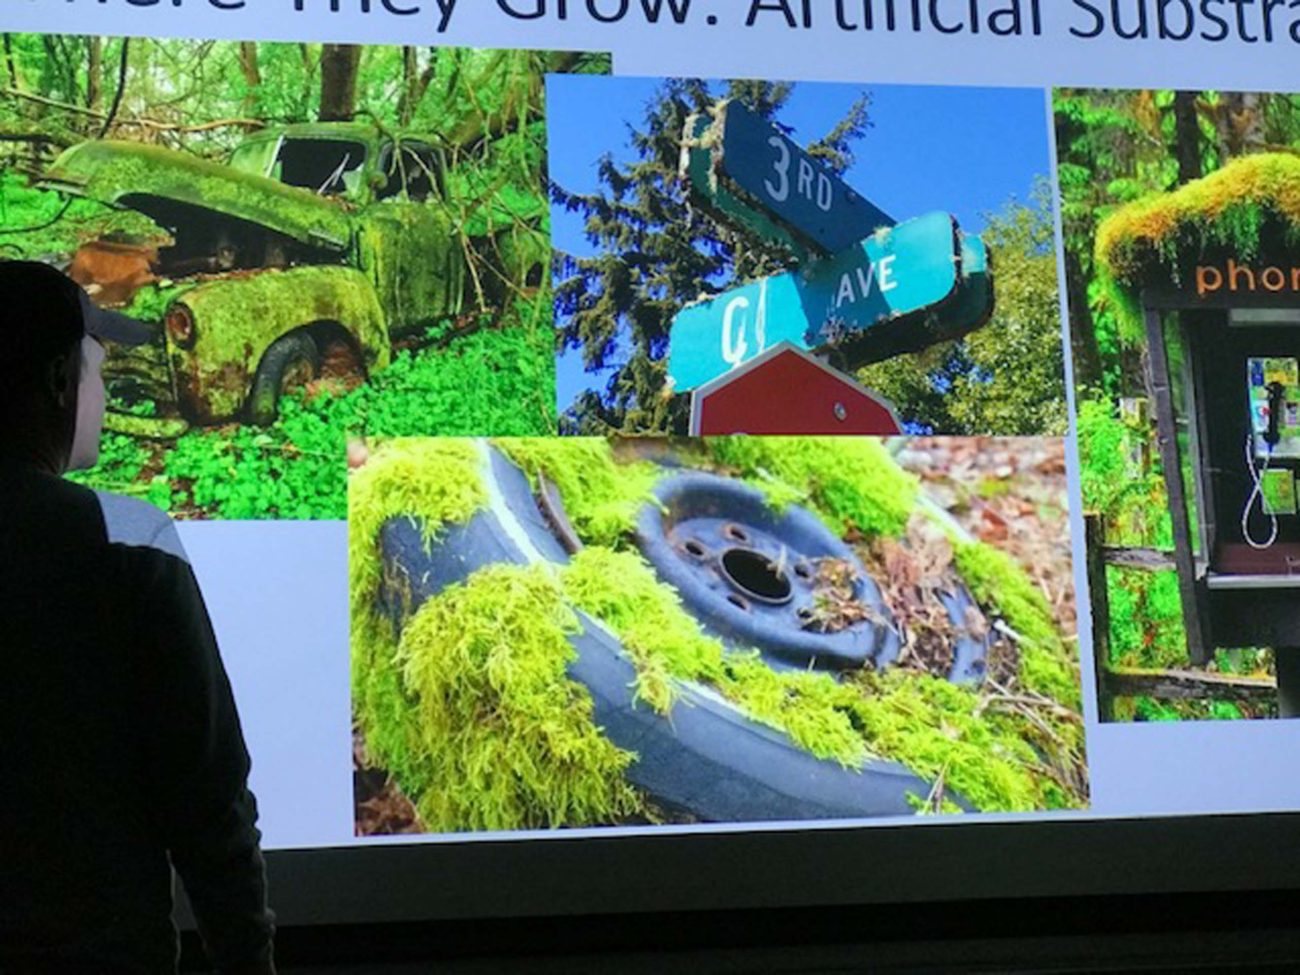 Examples from Olypic Peninsula, Washington, of byrophytes growing on non-organic matter. Scot Loring’s presentation at the February 20, 2020, Chapter meeting.